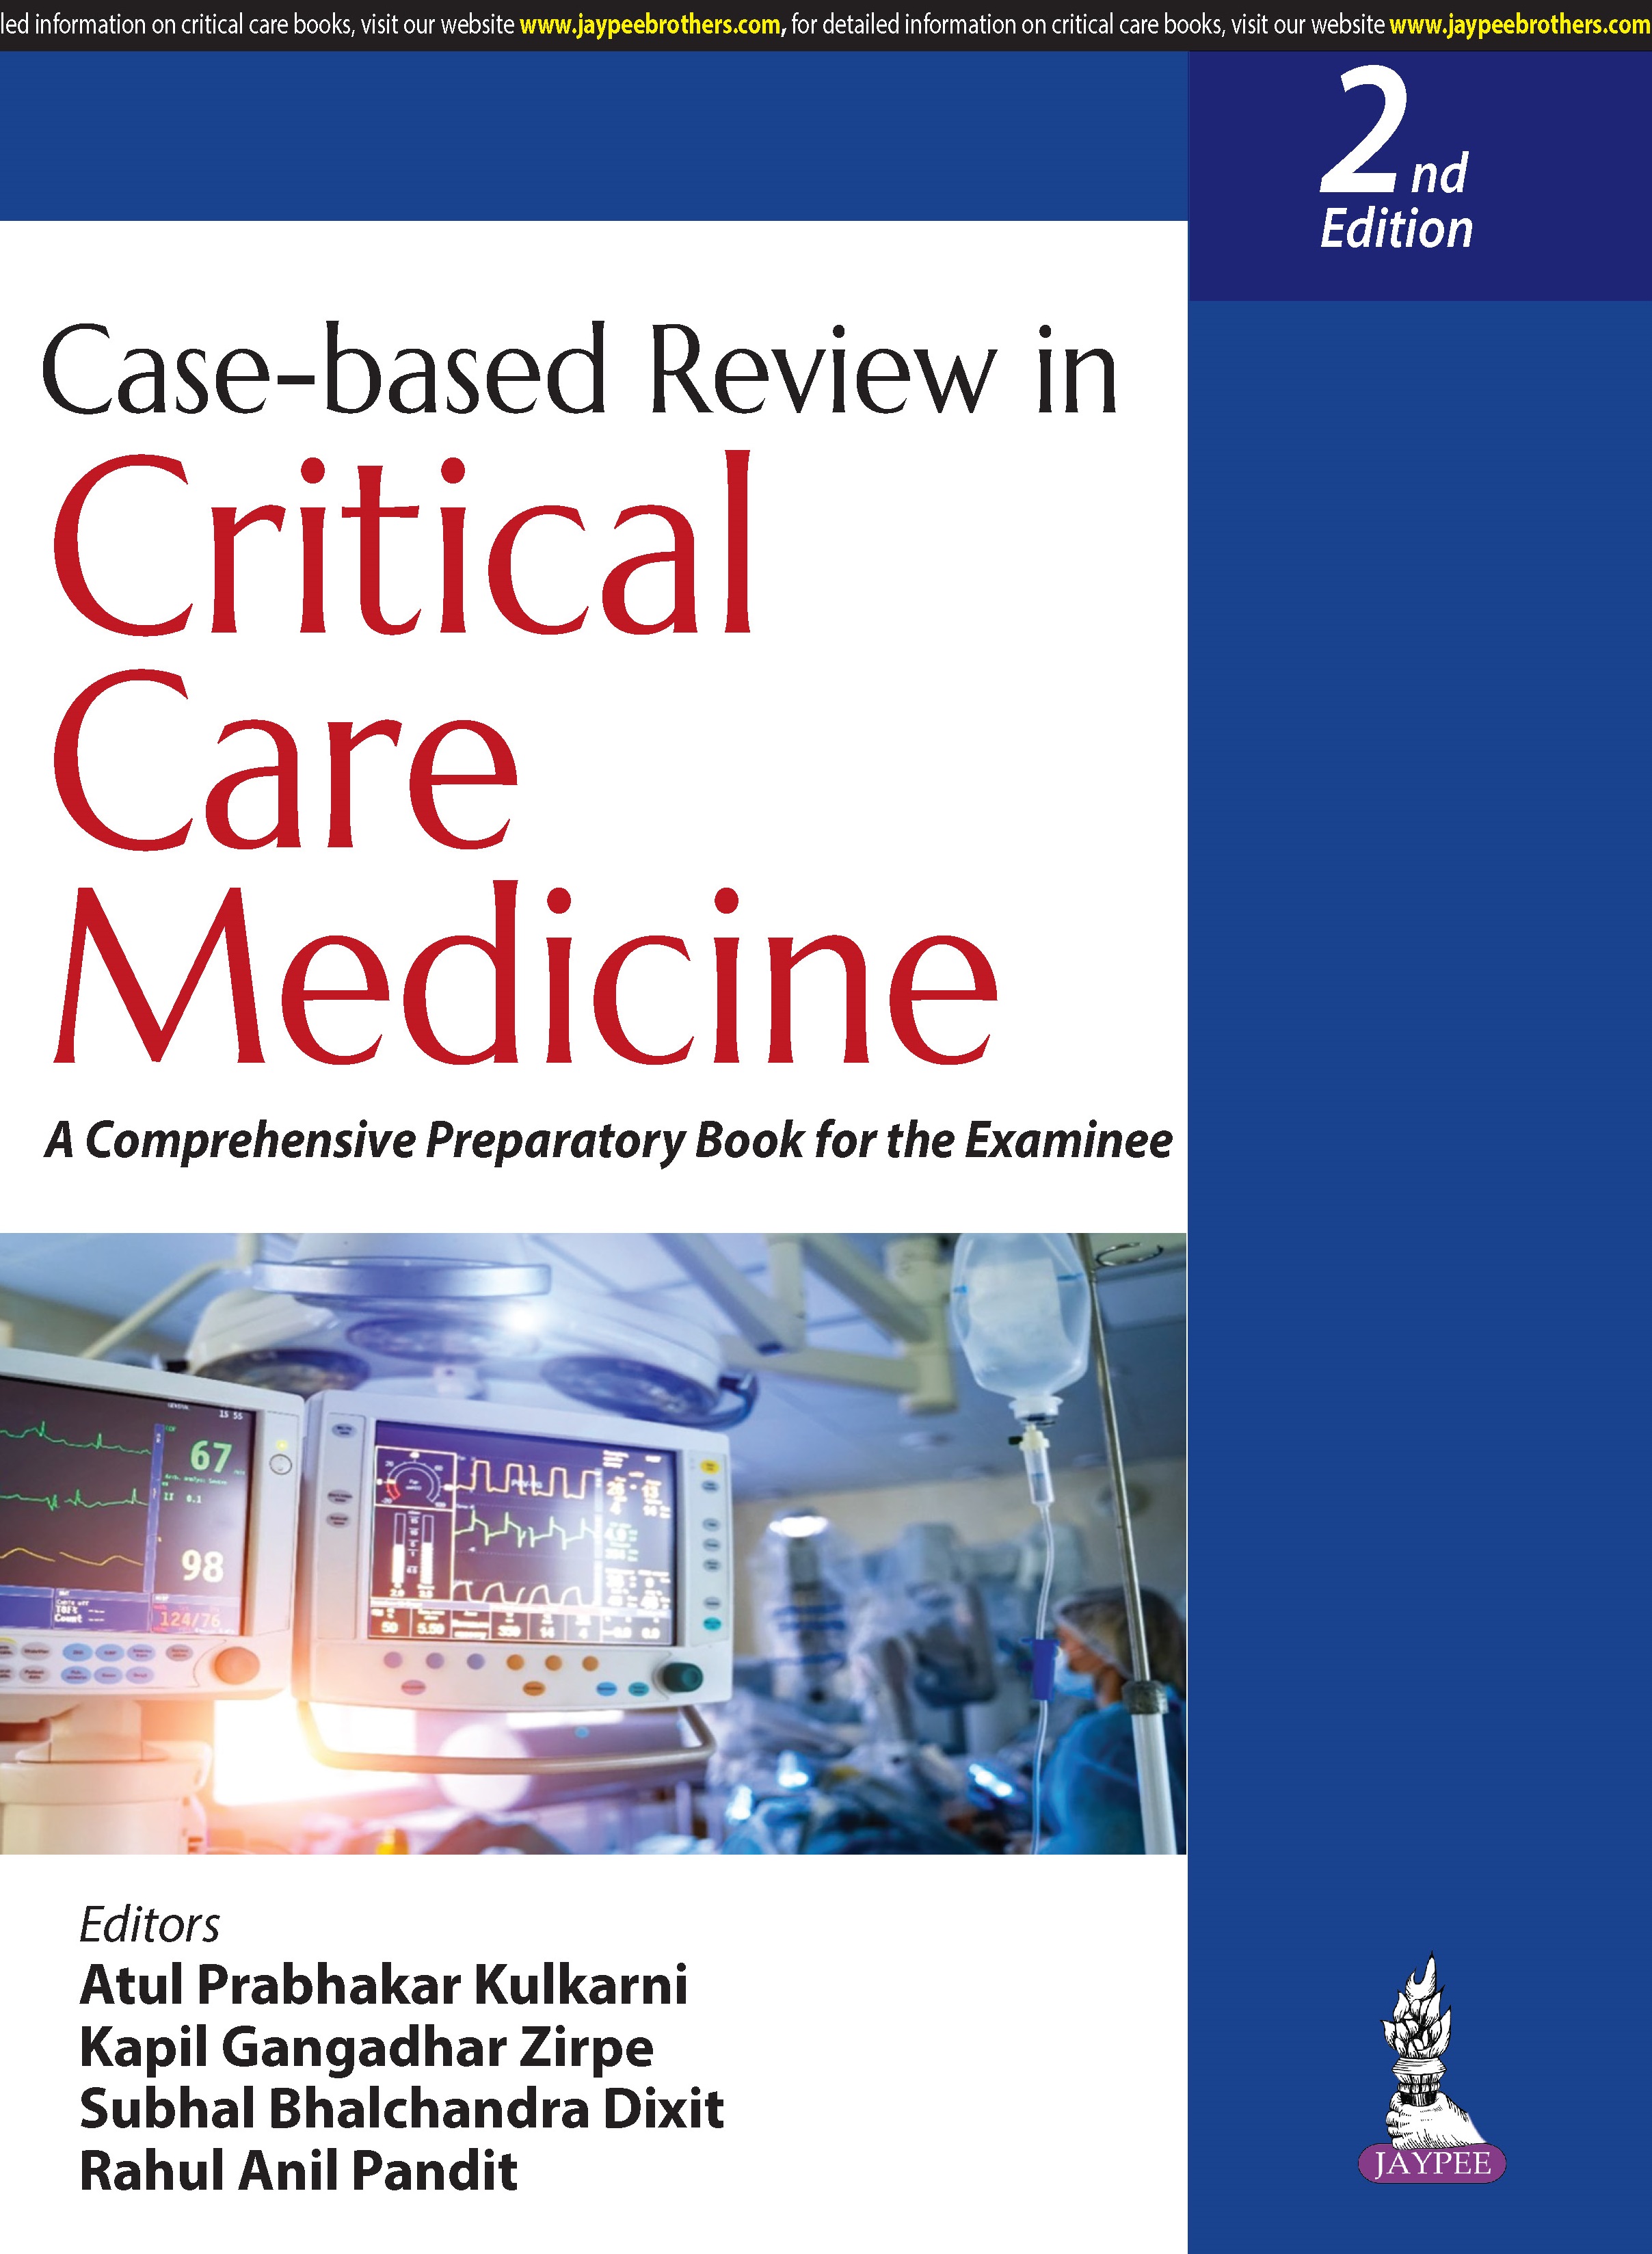 Case-based Review in Critical Care Medicine: A Comprehensive Preparatory Book for the Examinee